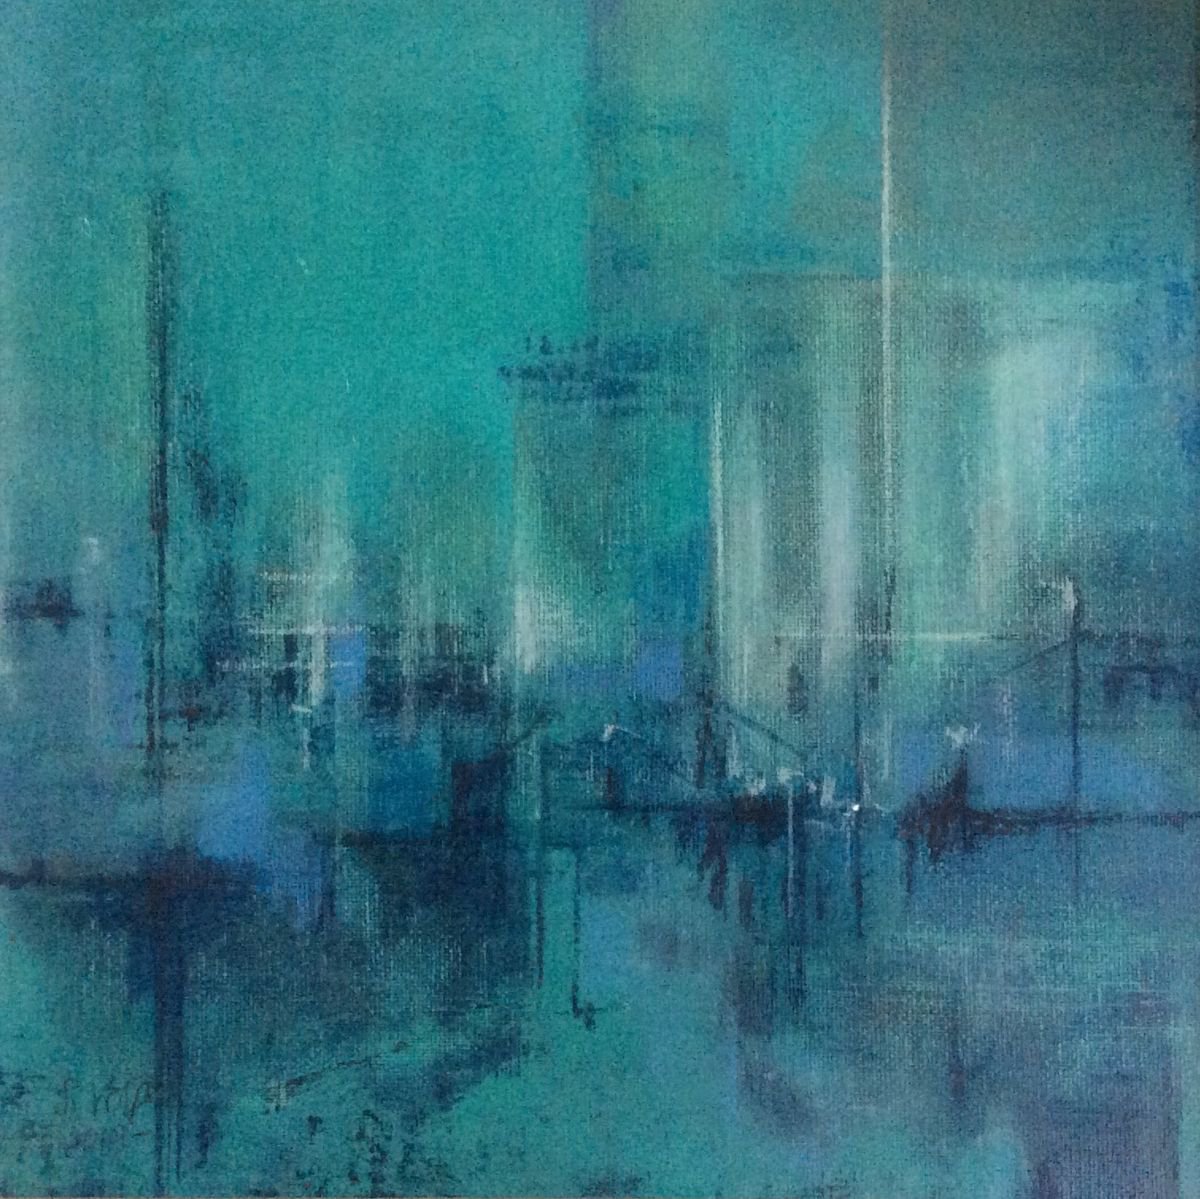 City over Water no.3 by Sheila Volpe